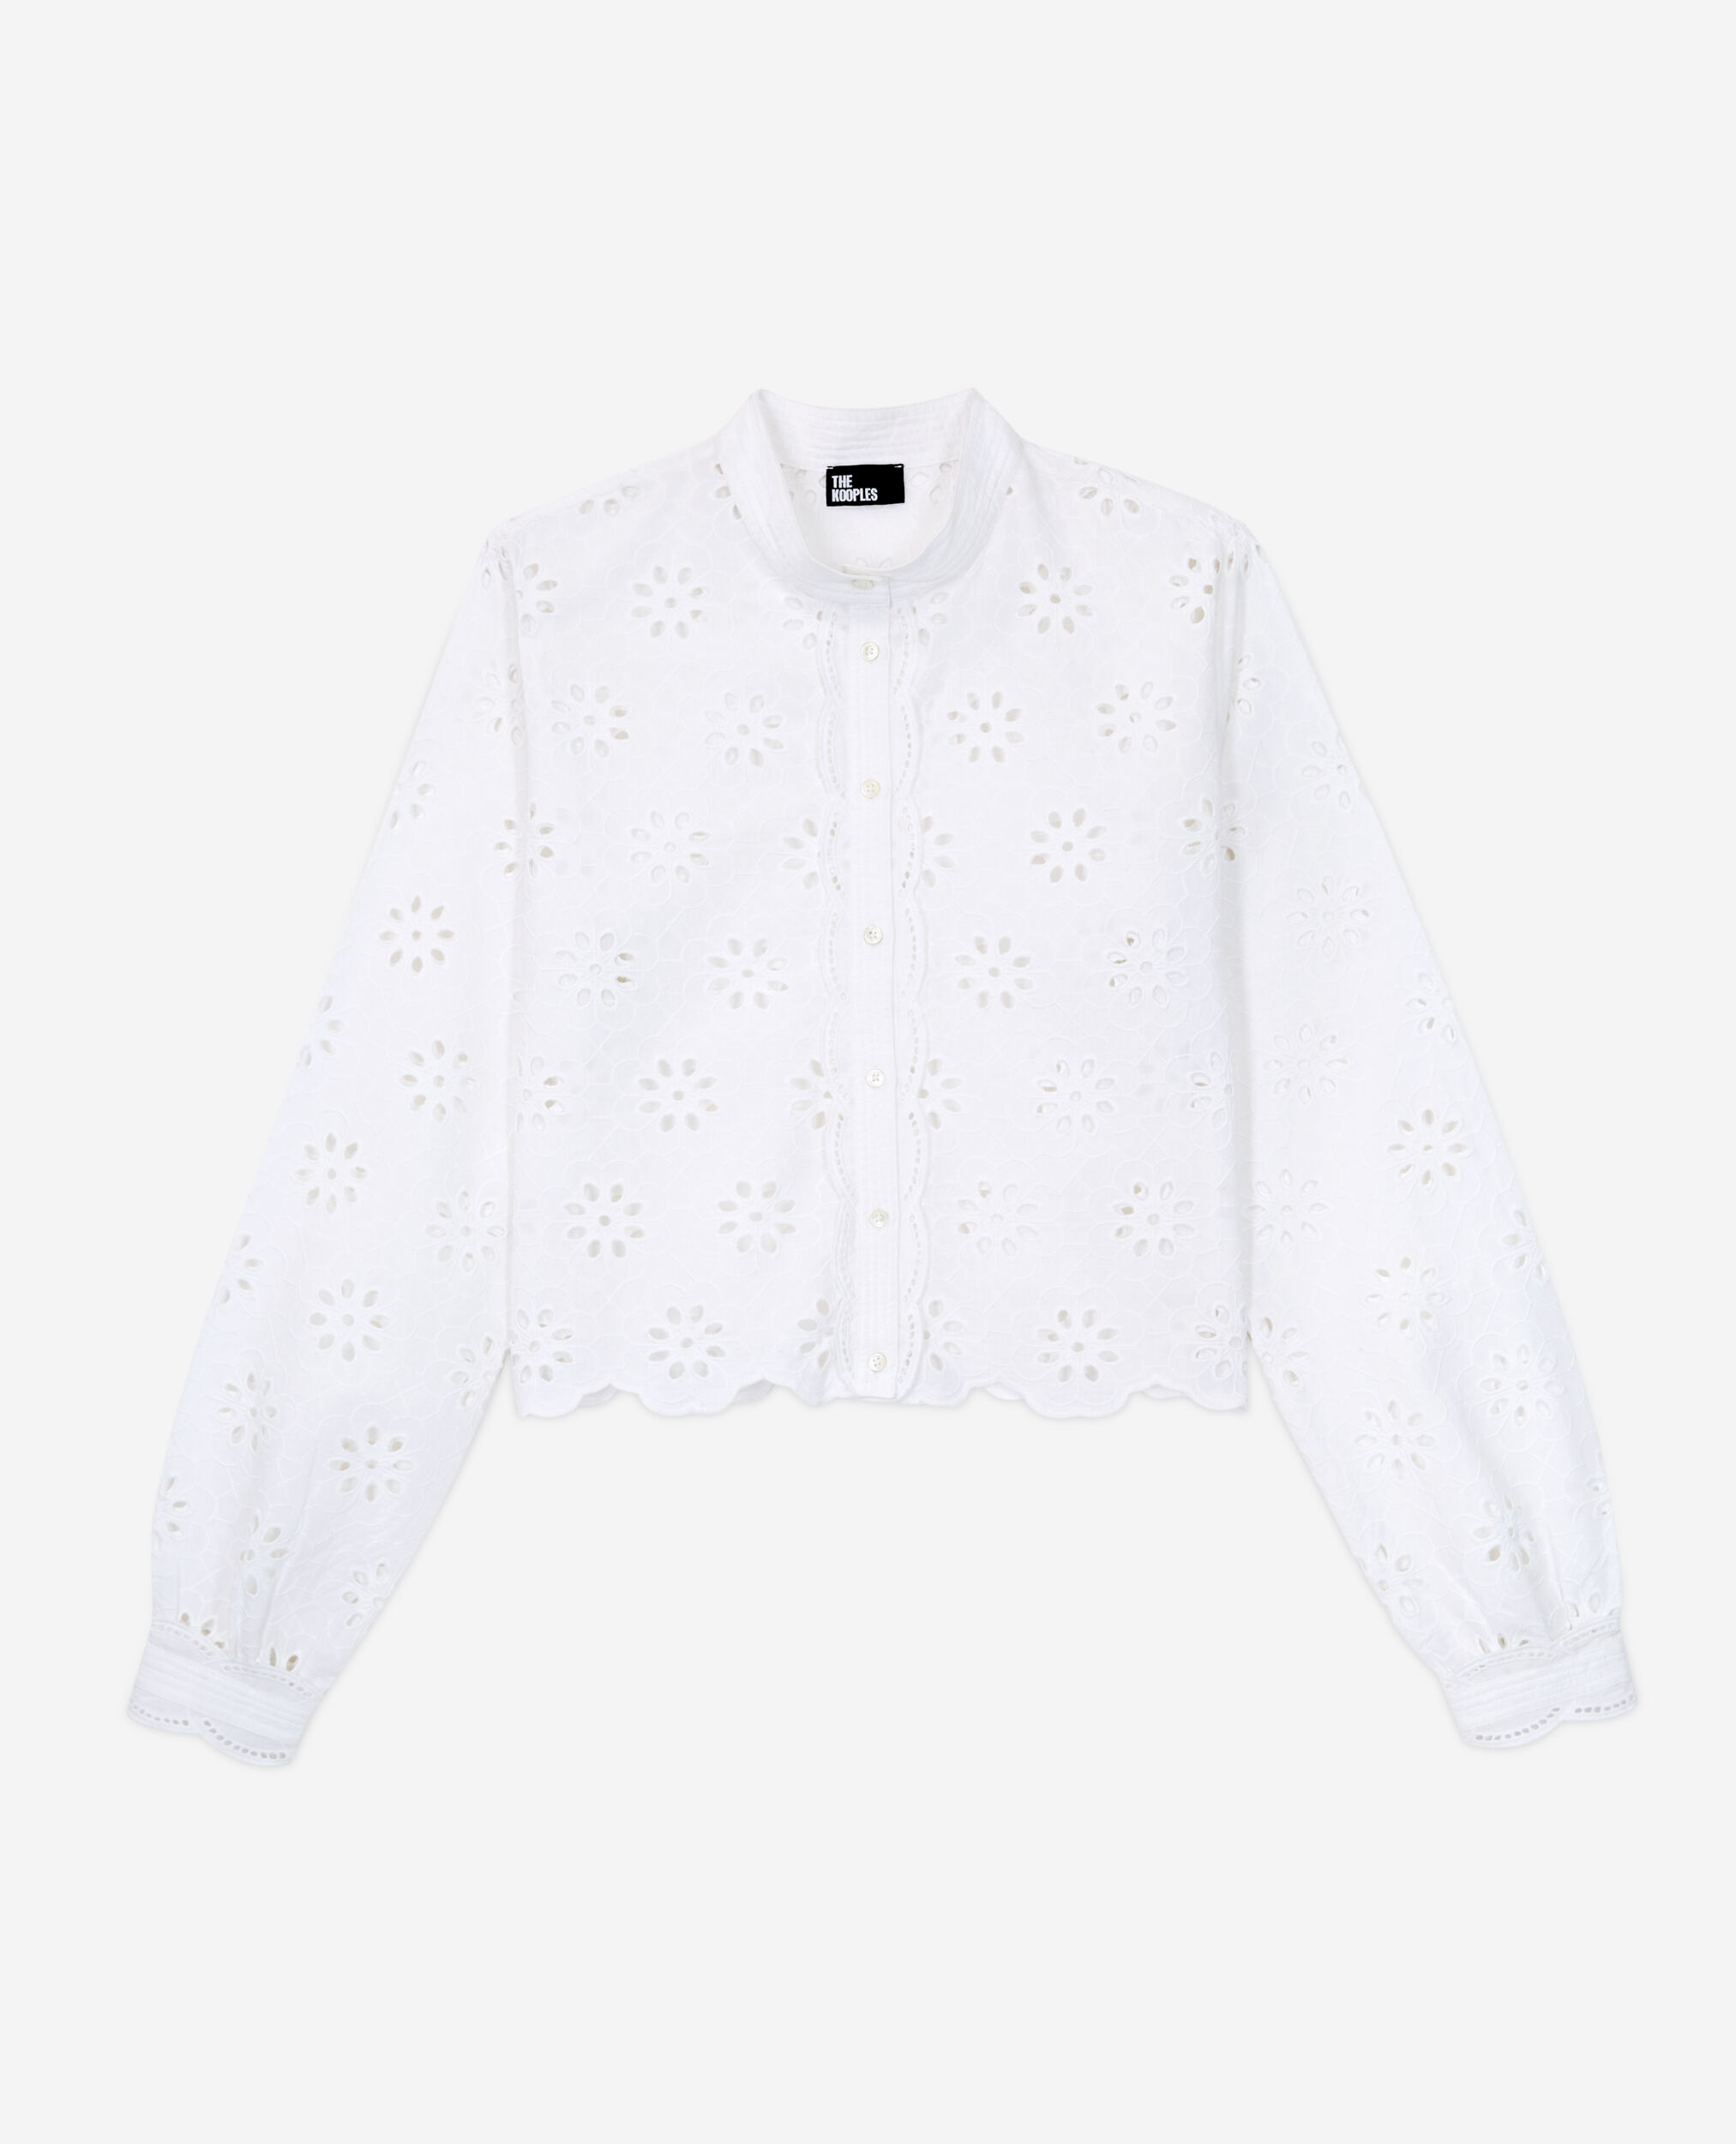 Chemise courte blanche en broderie Anglaise, WHITE, hi-res image number null